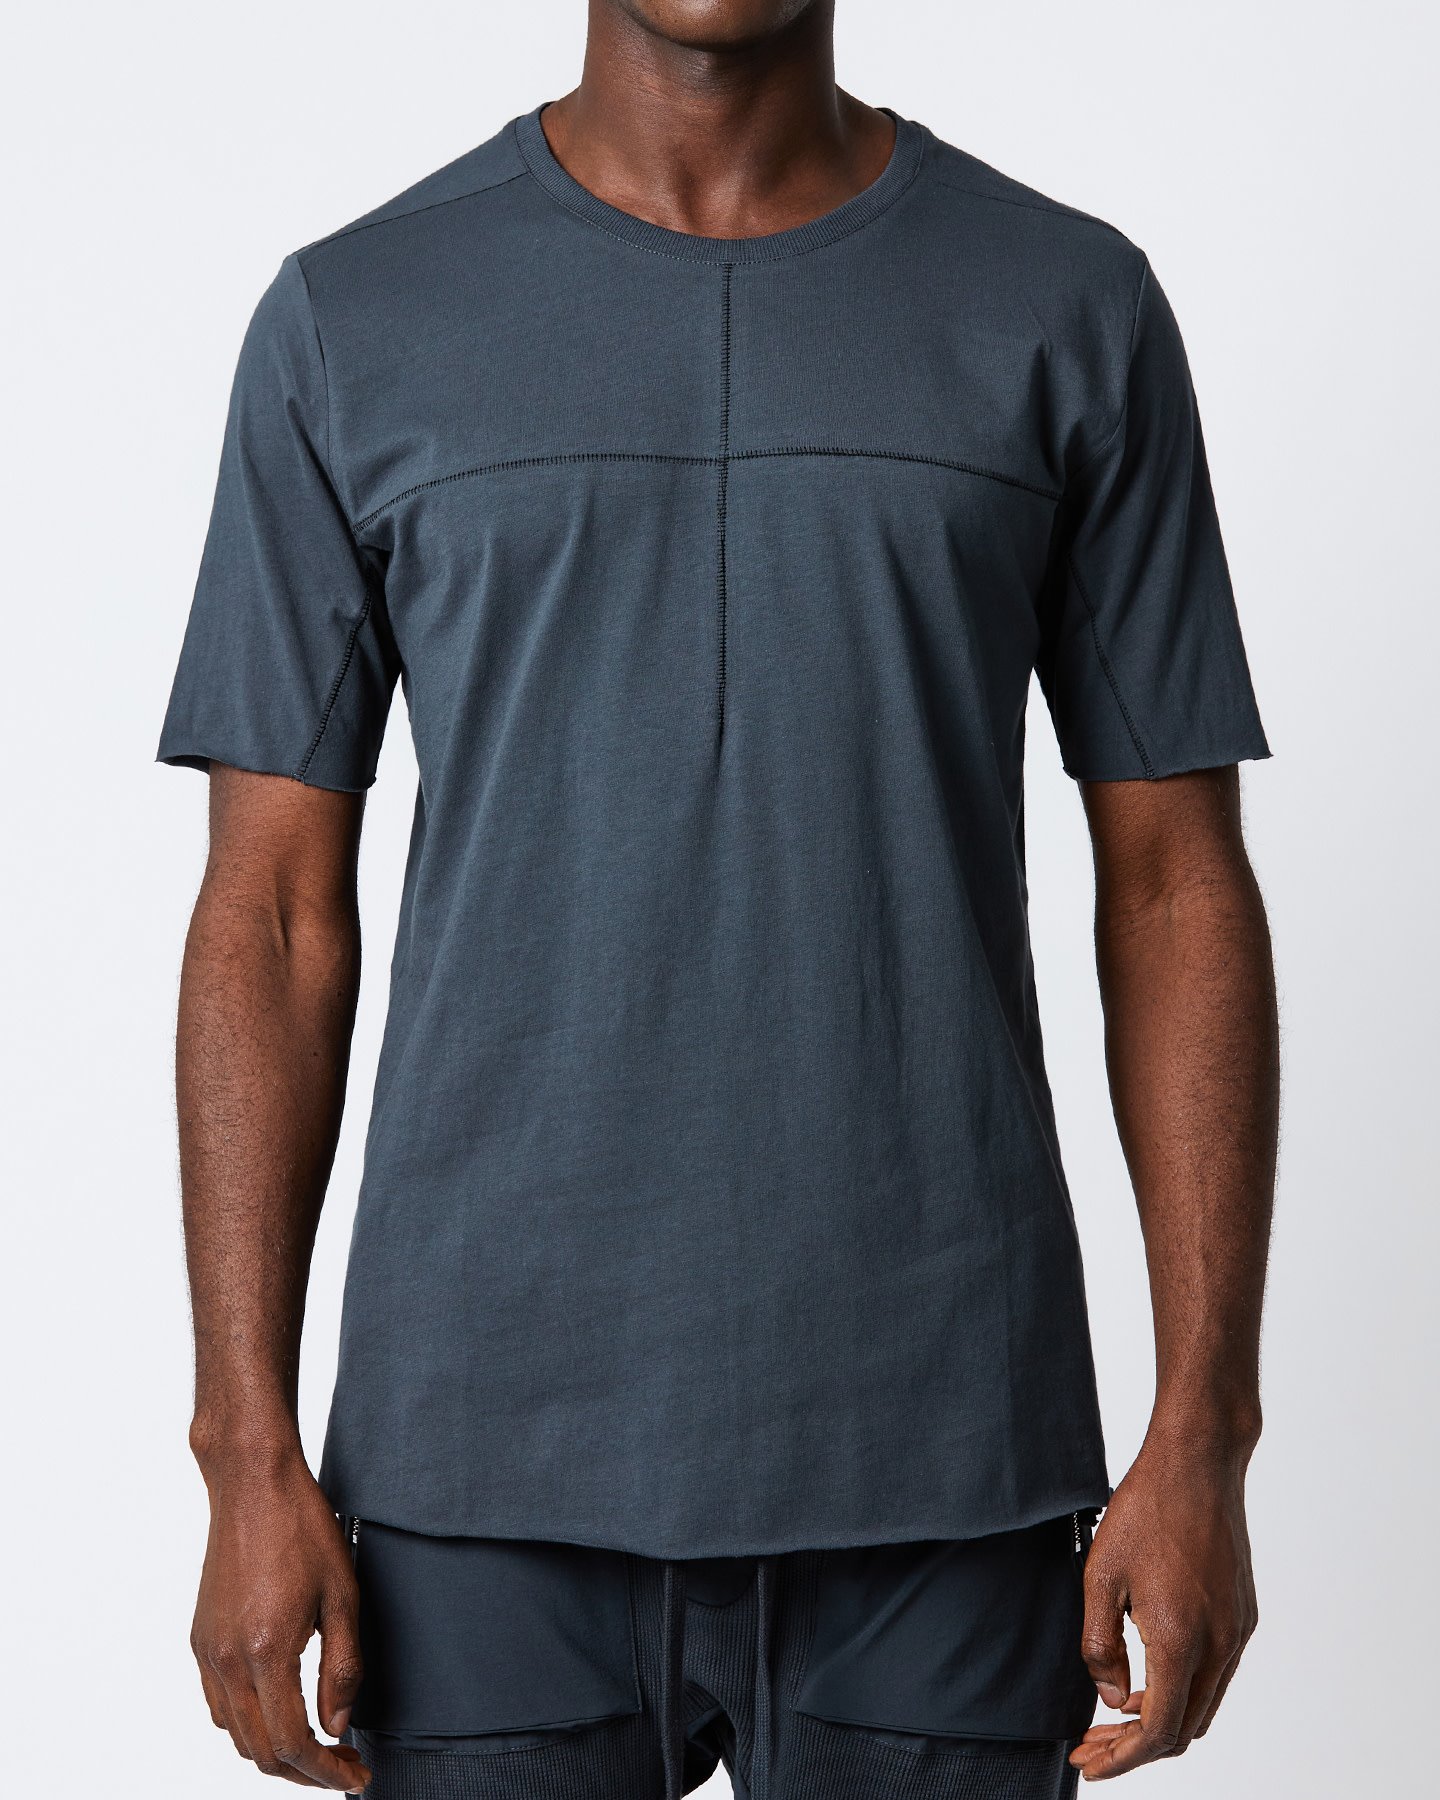 FITTED COTTON ARC STITCH T-SHIRT - FOREST